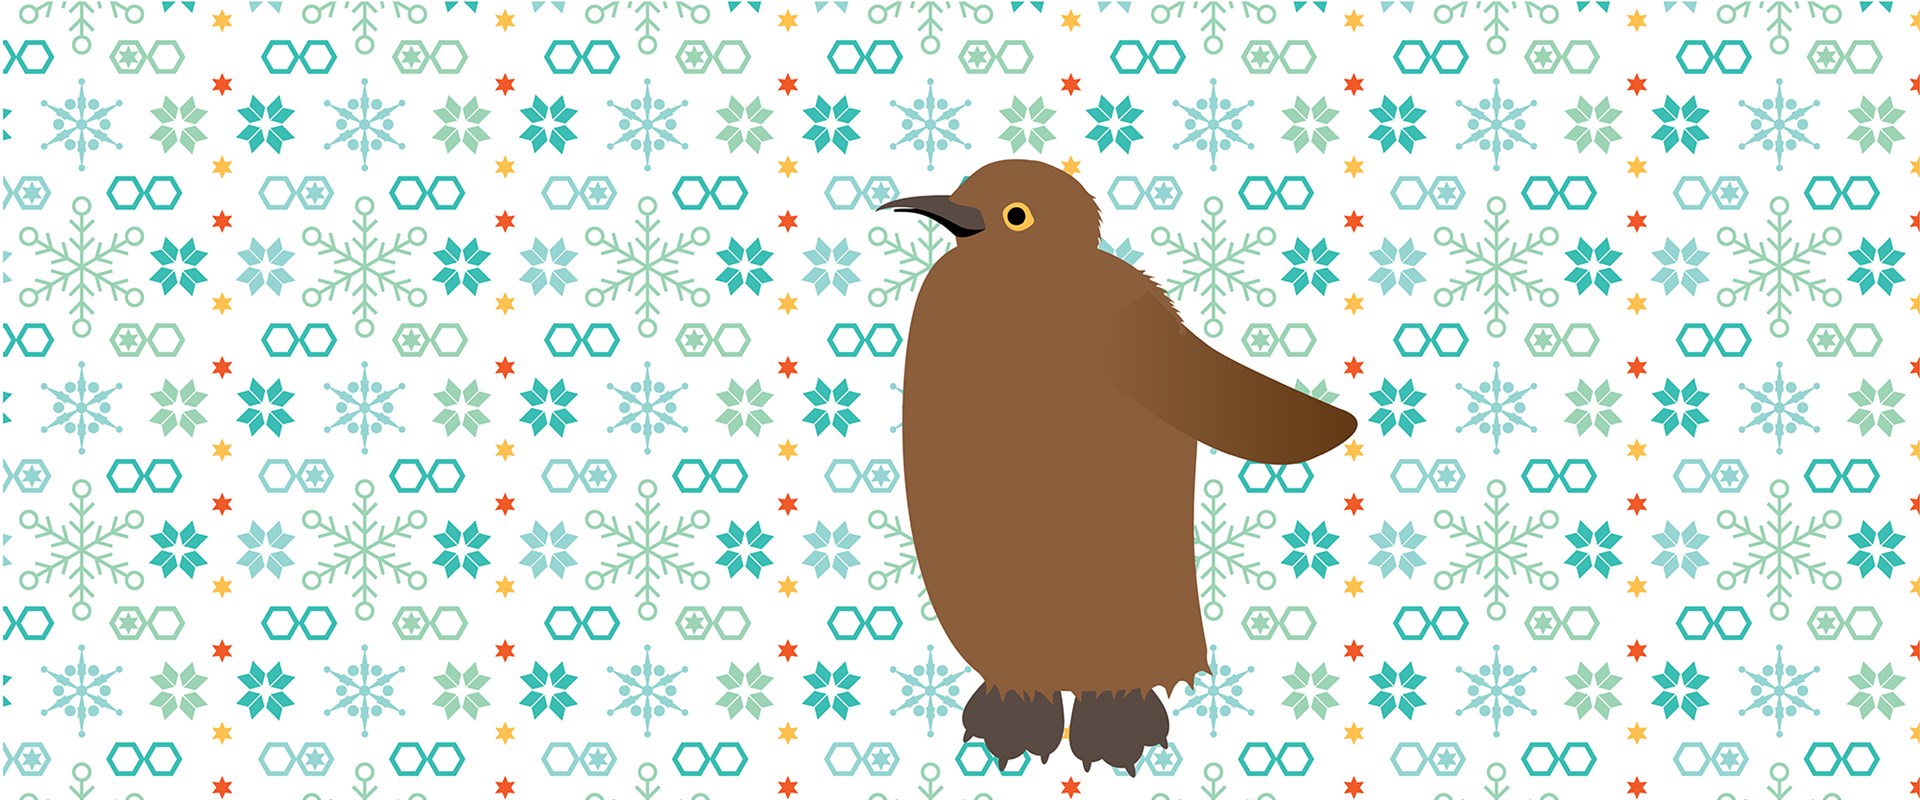 Illustration of a brown baby king penguin on a background full of snowflakes